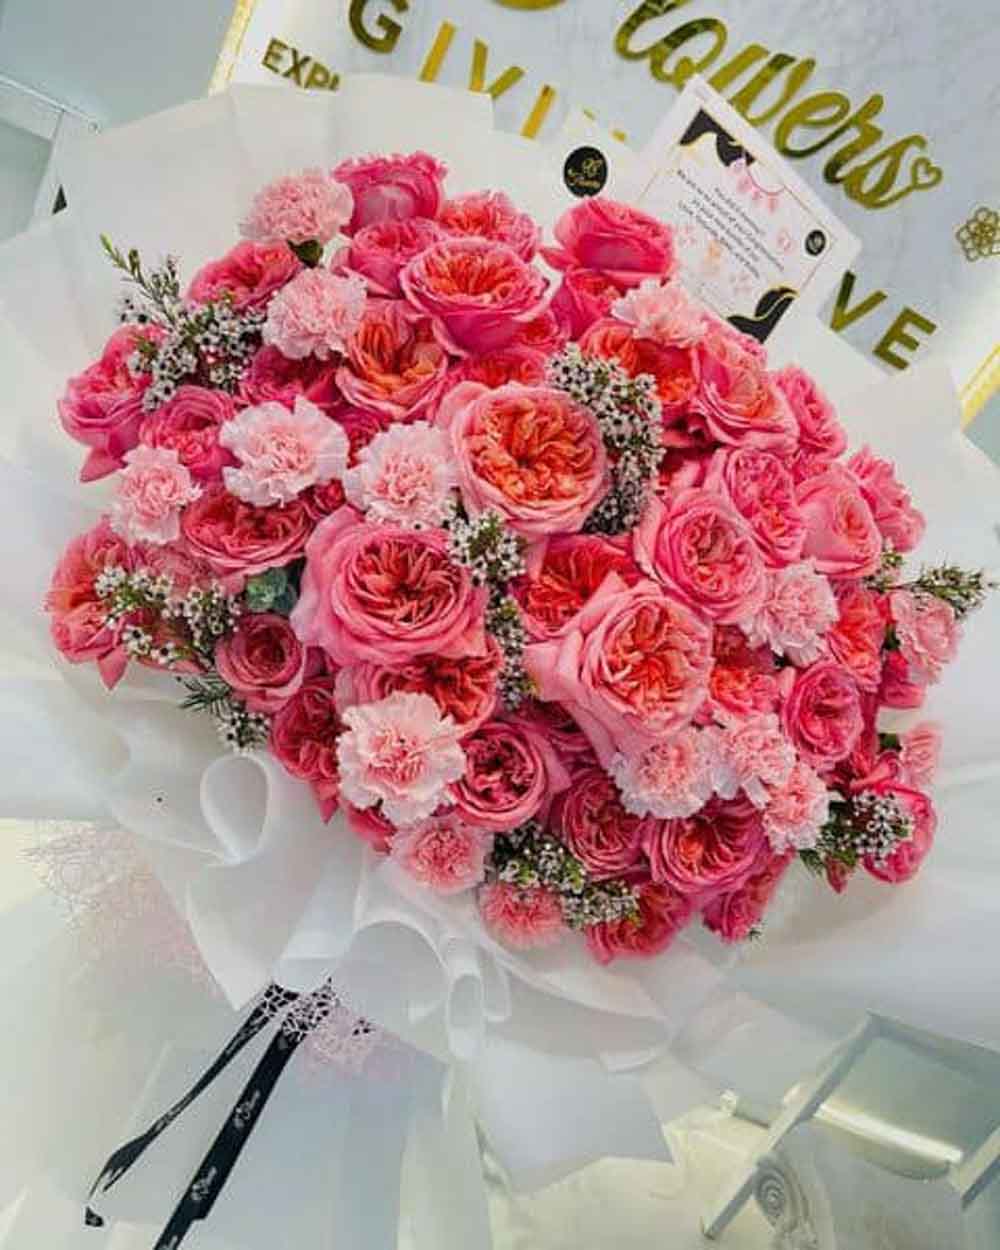 Bouquet Of Hot Pink Roses is suitable for wedding anniversary flowers